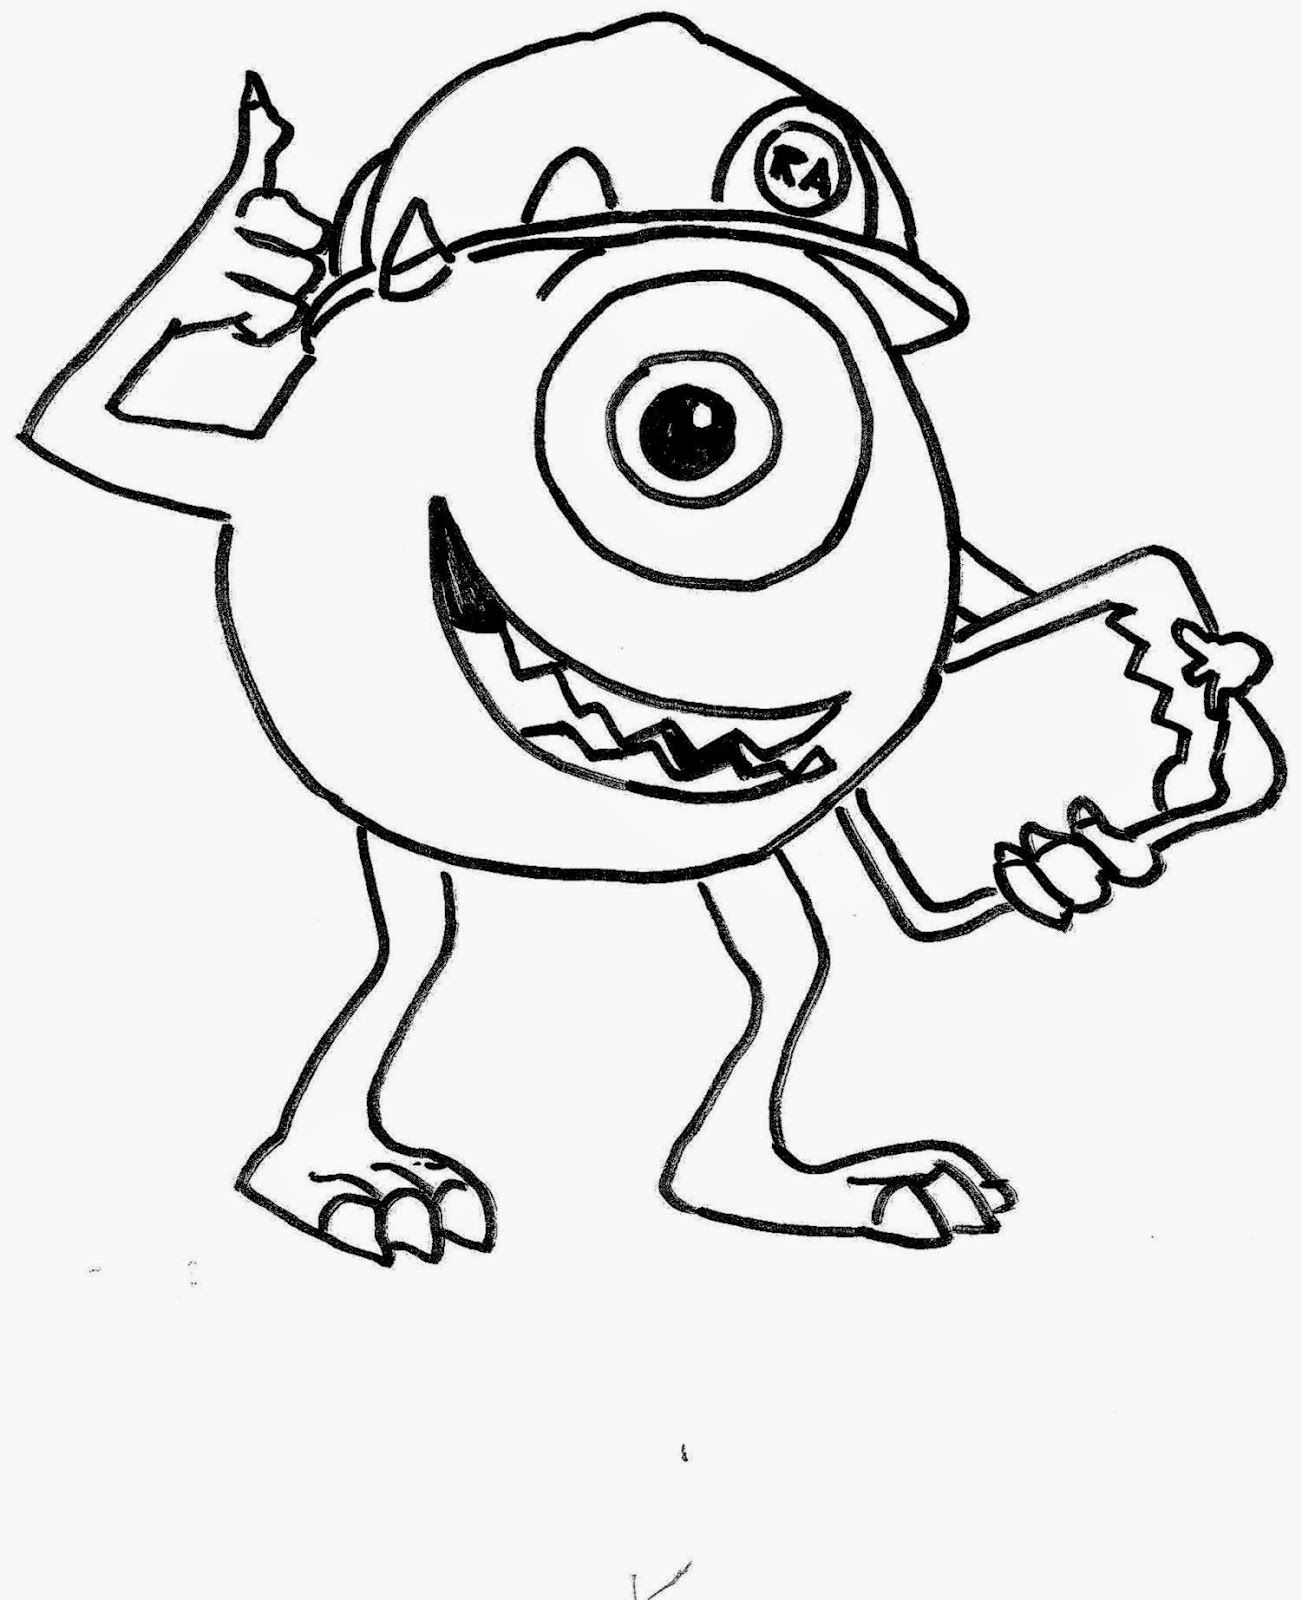 Childrens Coloring Sheets | Free Coloring Sheet